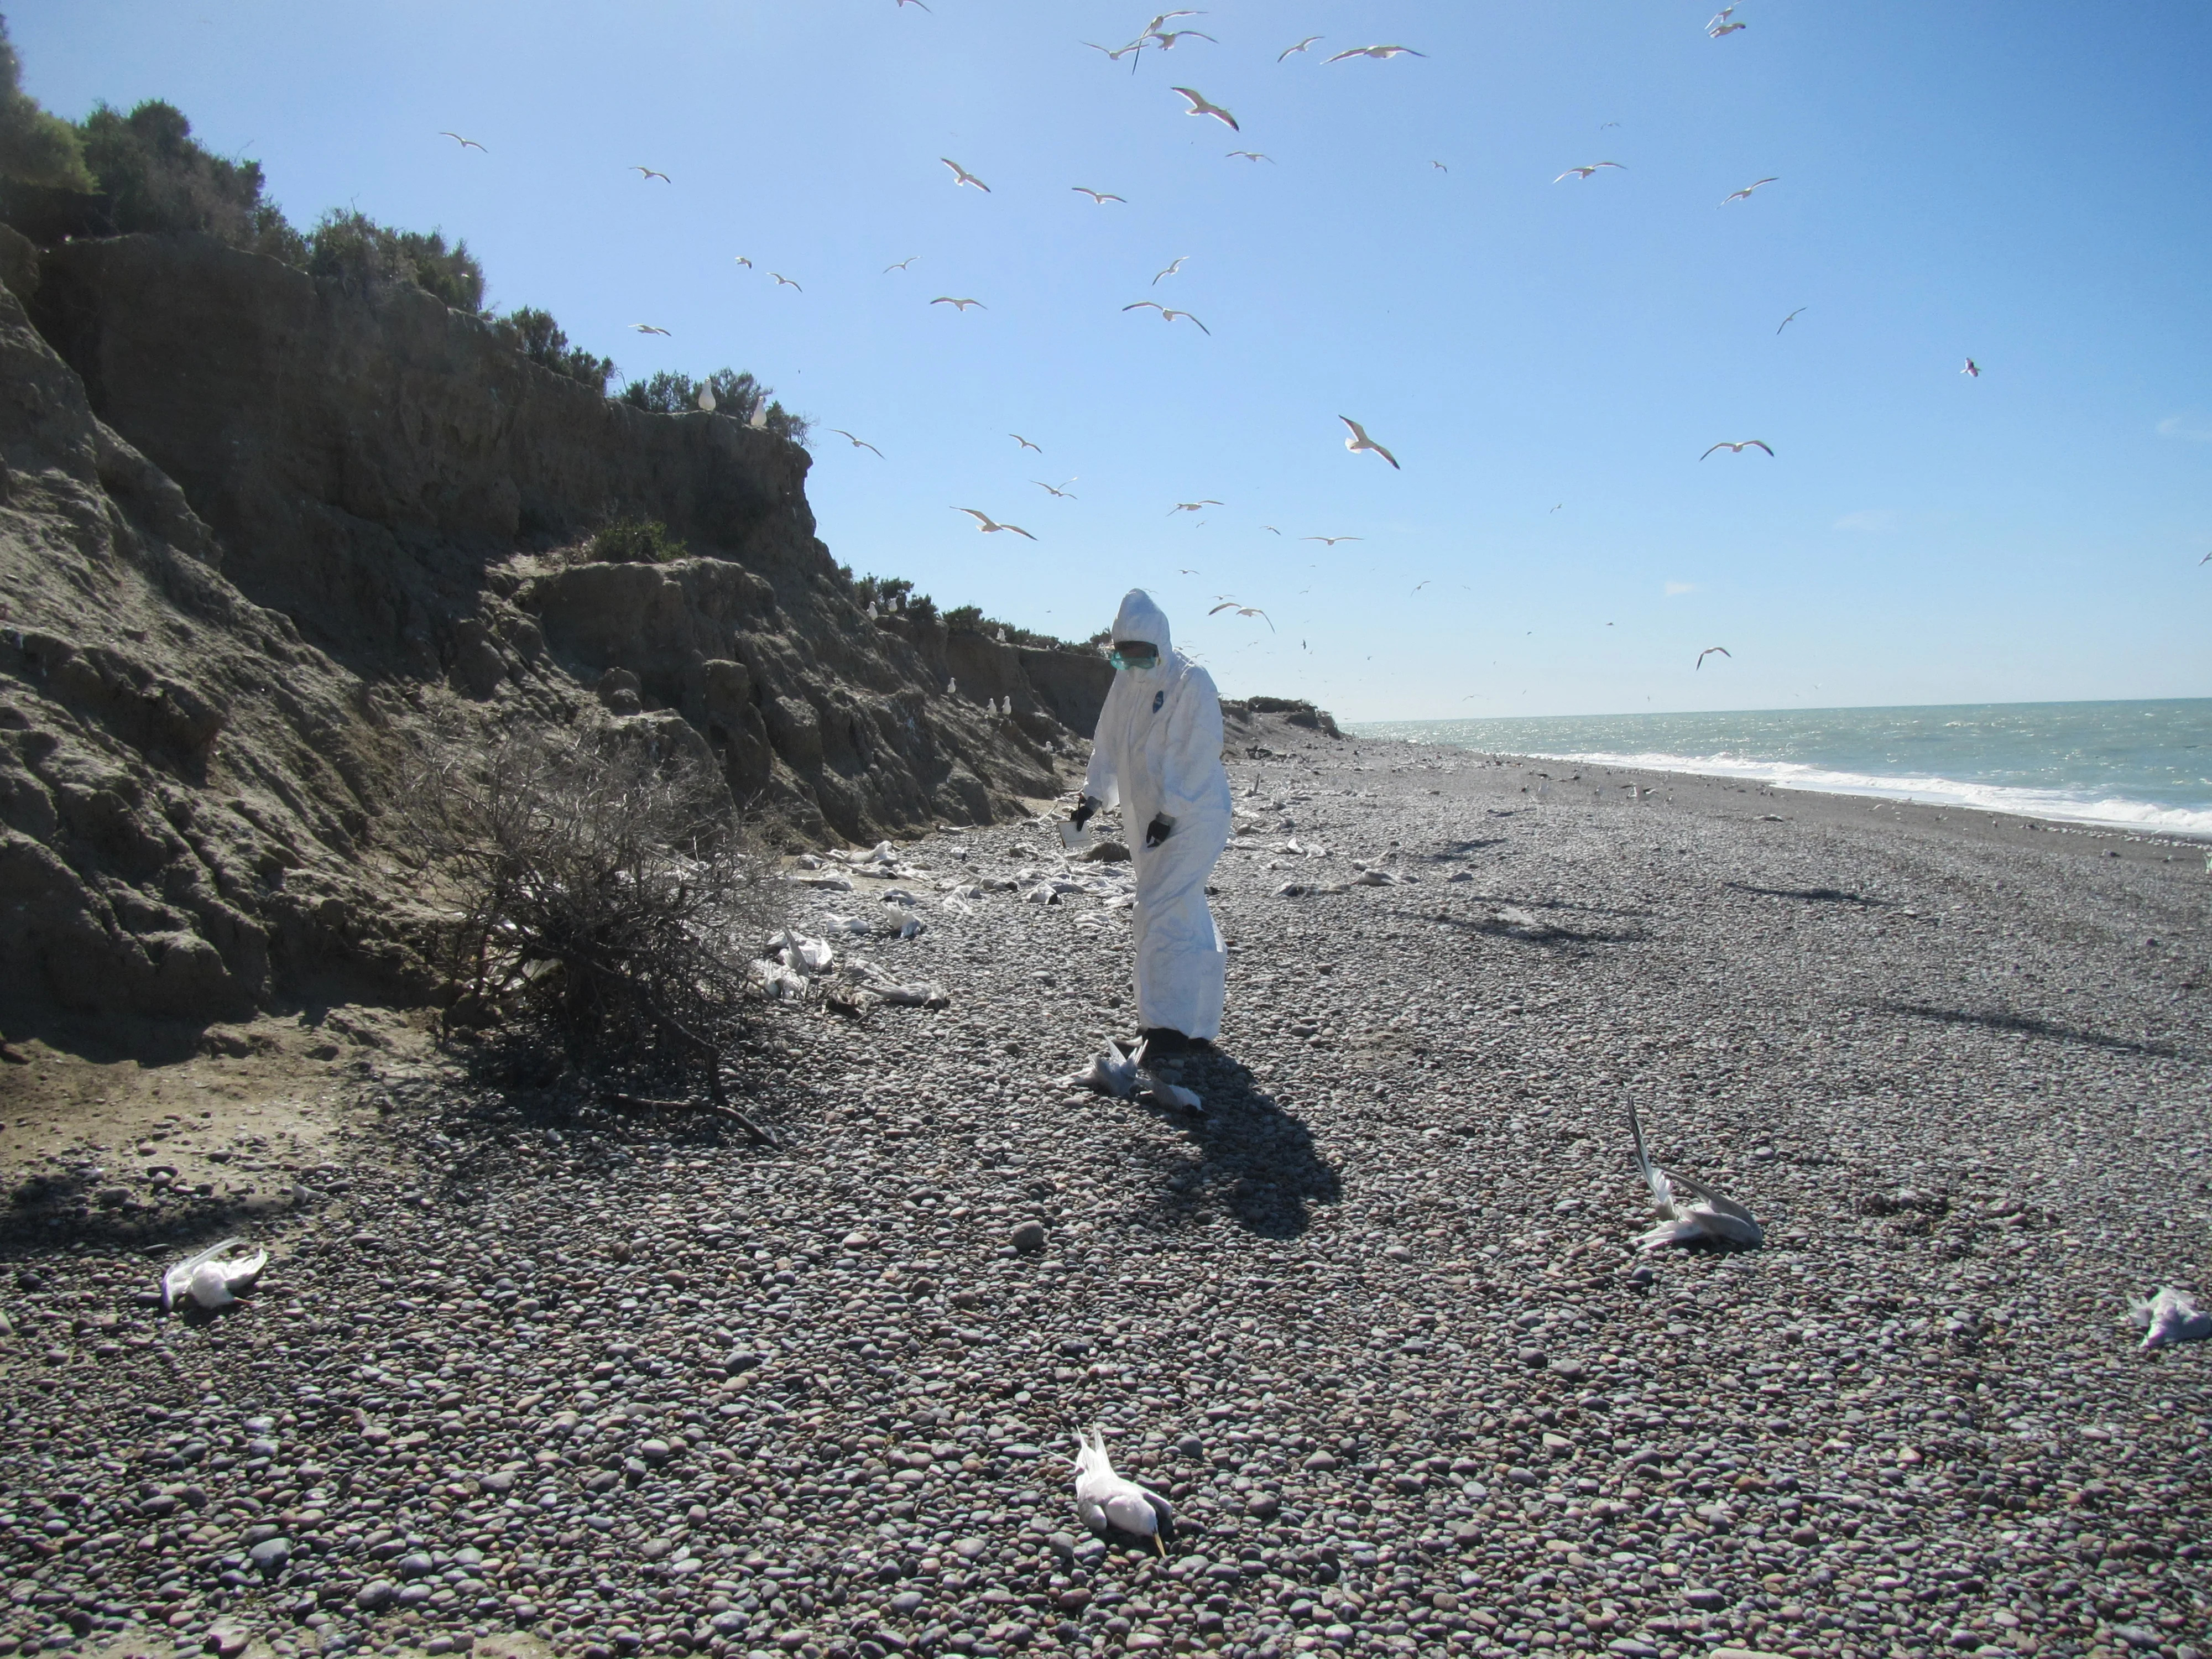 A scientist in a hazmat suit counts dead terns on a beach with brush and the foot of a small cliff in the background